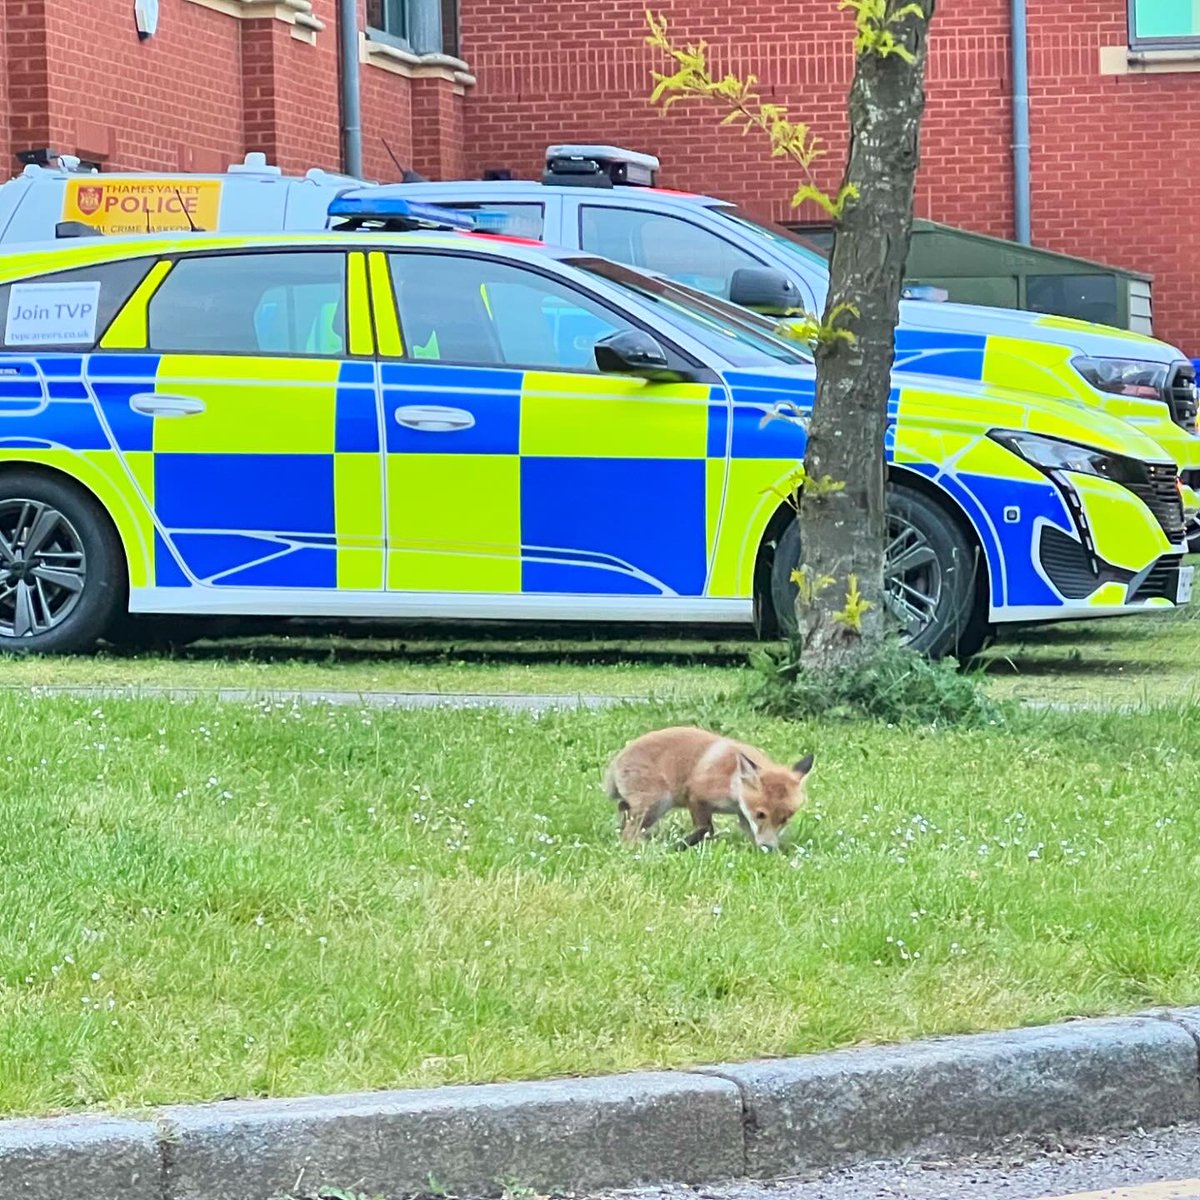 Officers from the Rural Crime Taskforce took a moment to watch our resident fox family play in one of our car parks last night 🦊  

@ChrisGPackham #foxoftheday